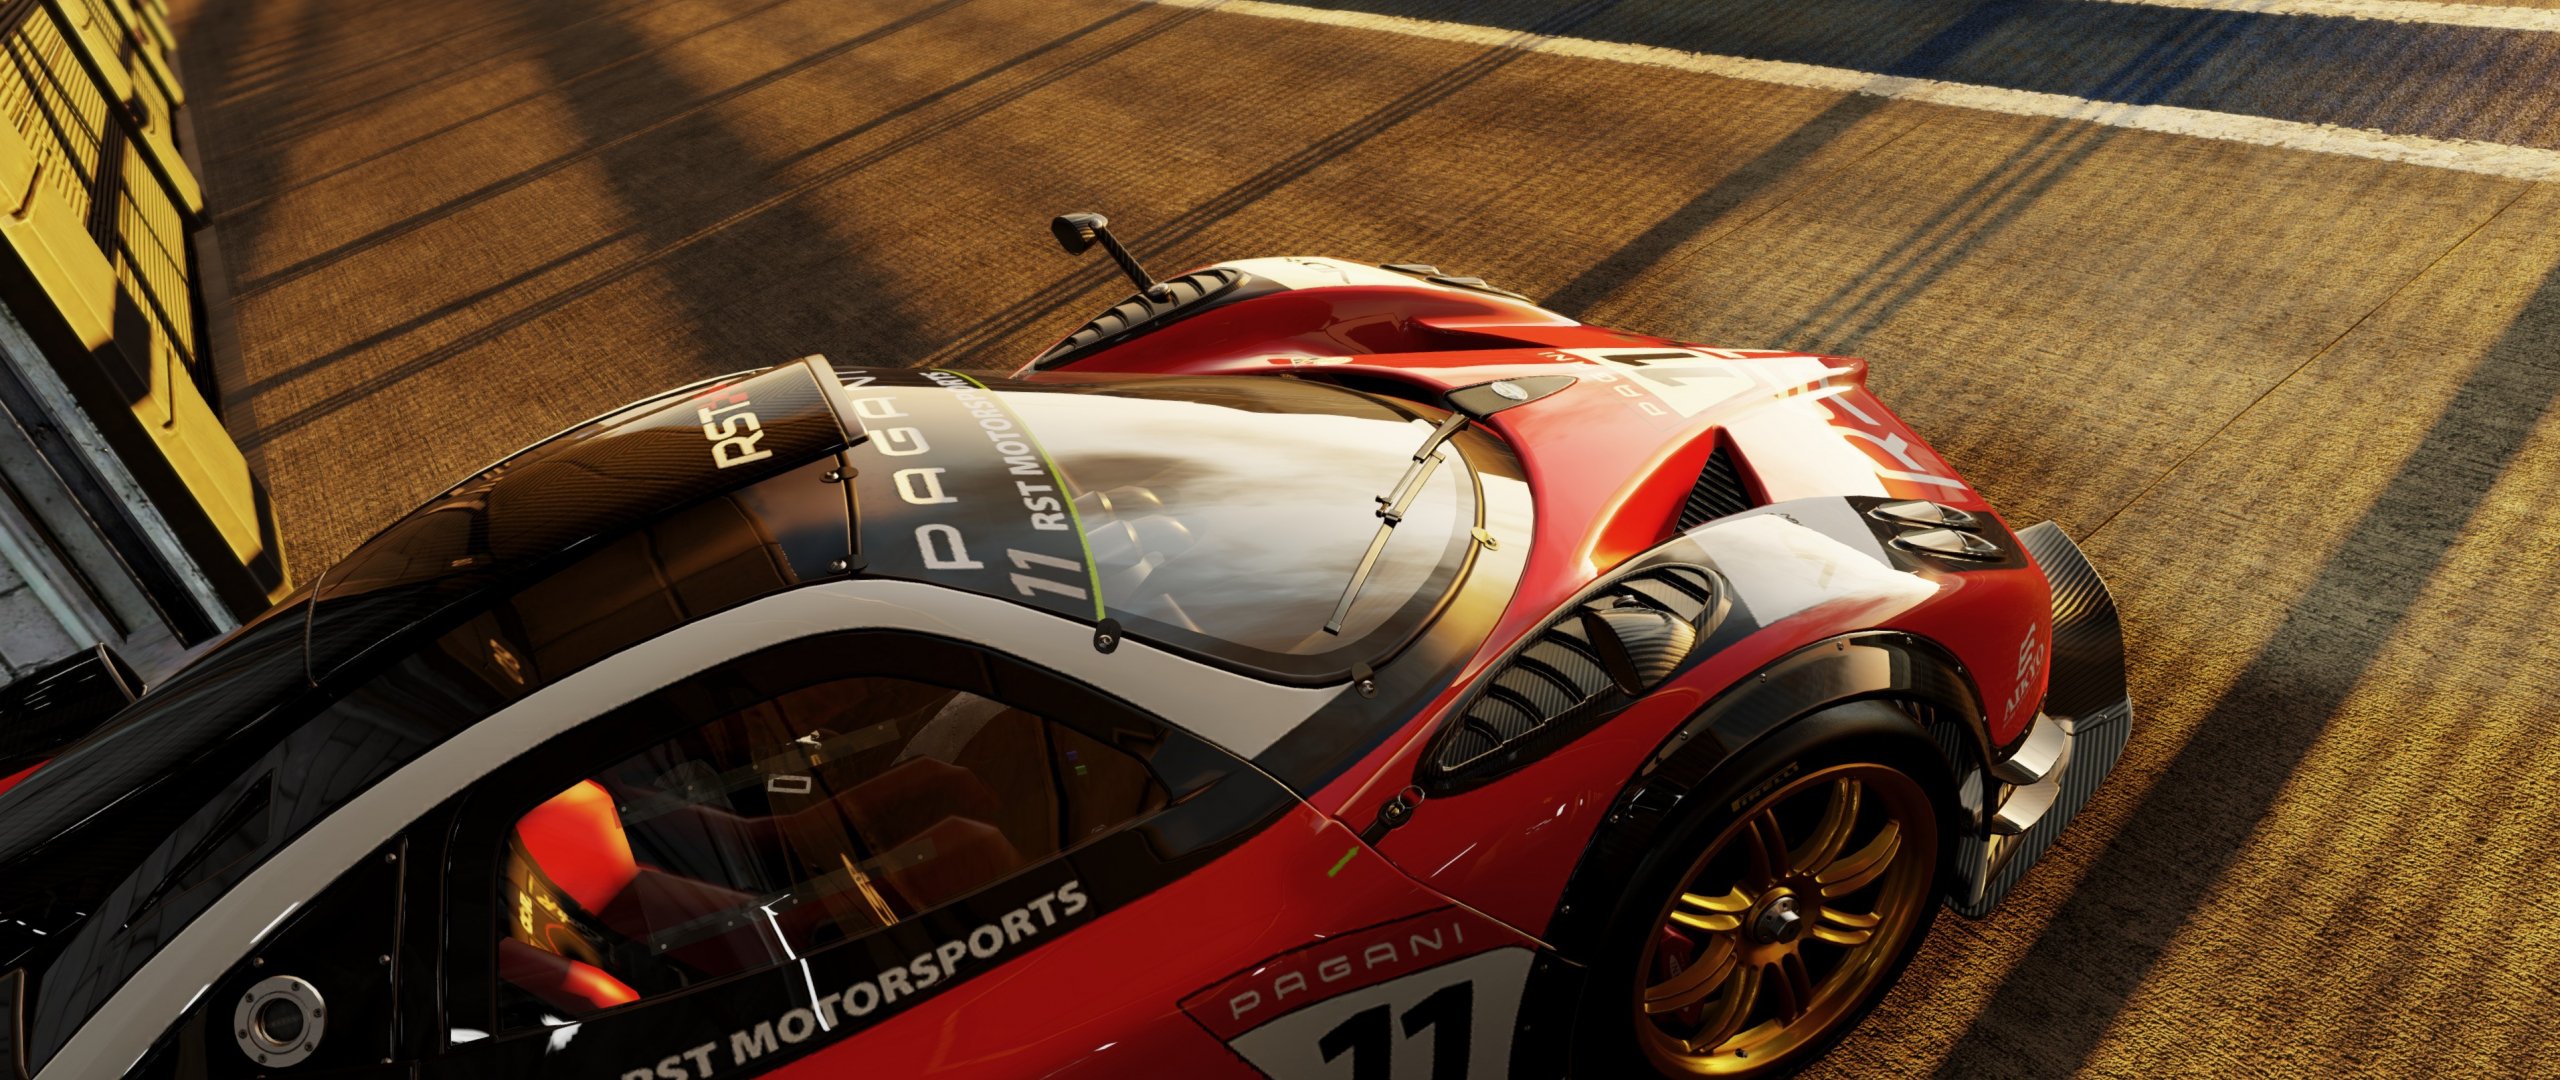 Desktop Wallpaper Project Cars Video Game, 2015 Racing Game, HD Image, Picture, Background, 3rex R